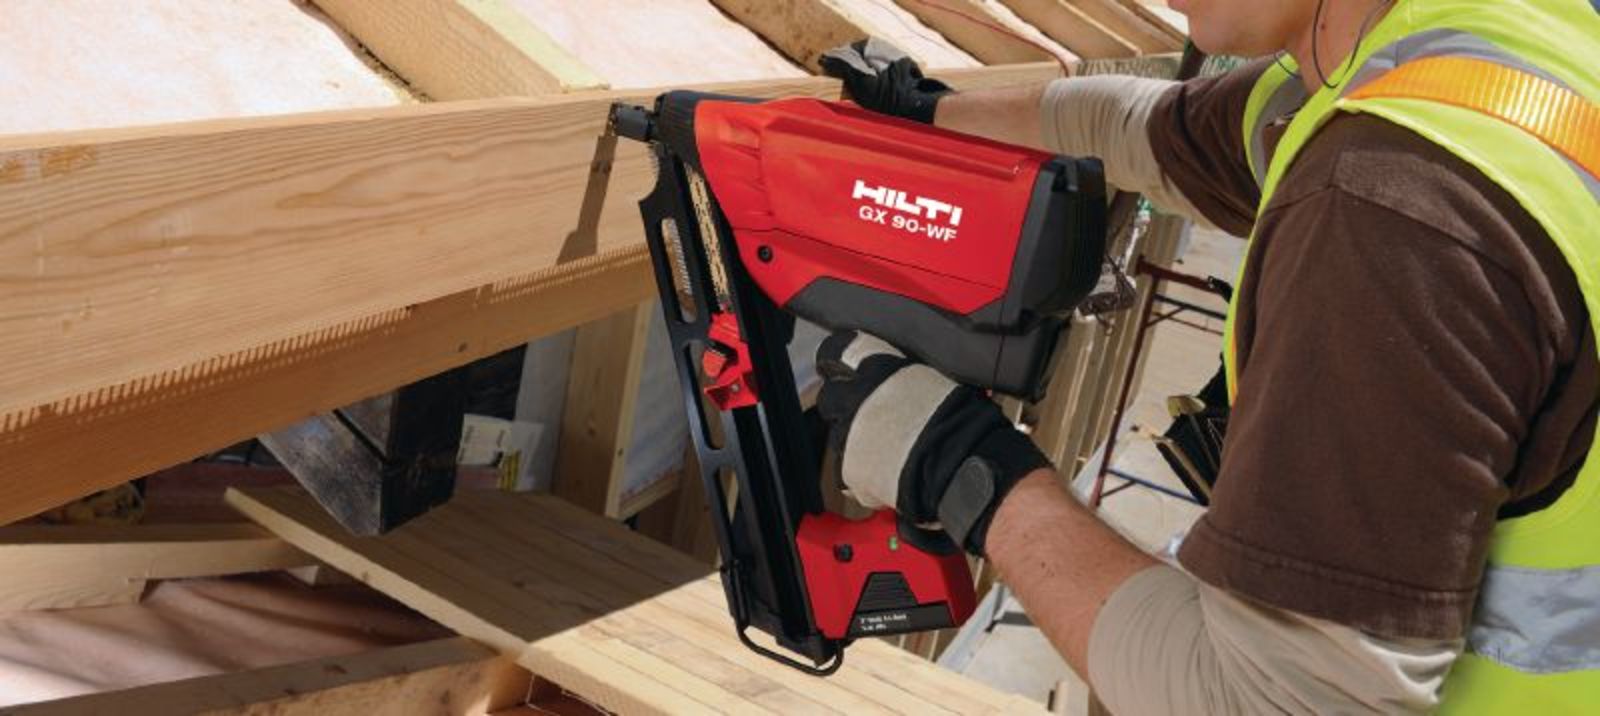 125F Gas Nailer to 90mm